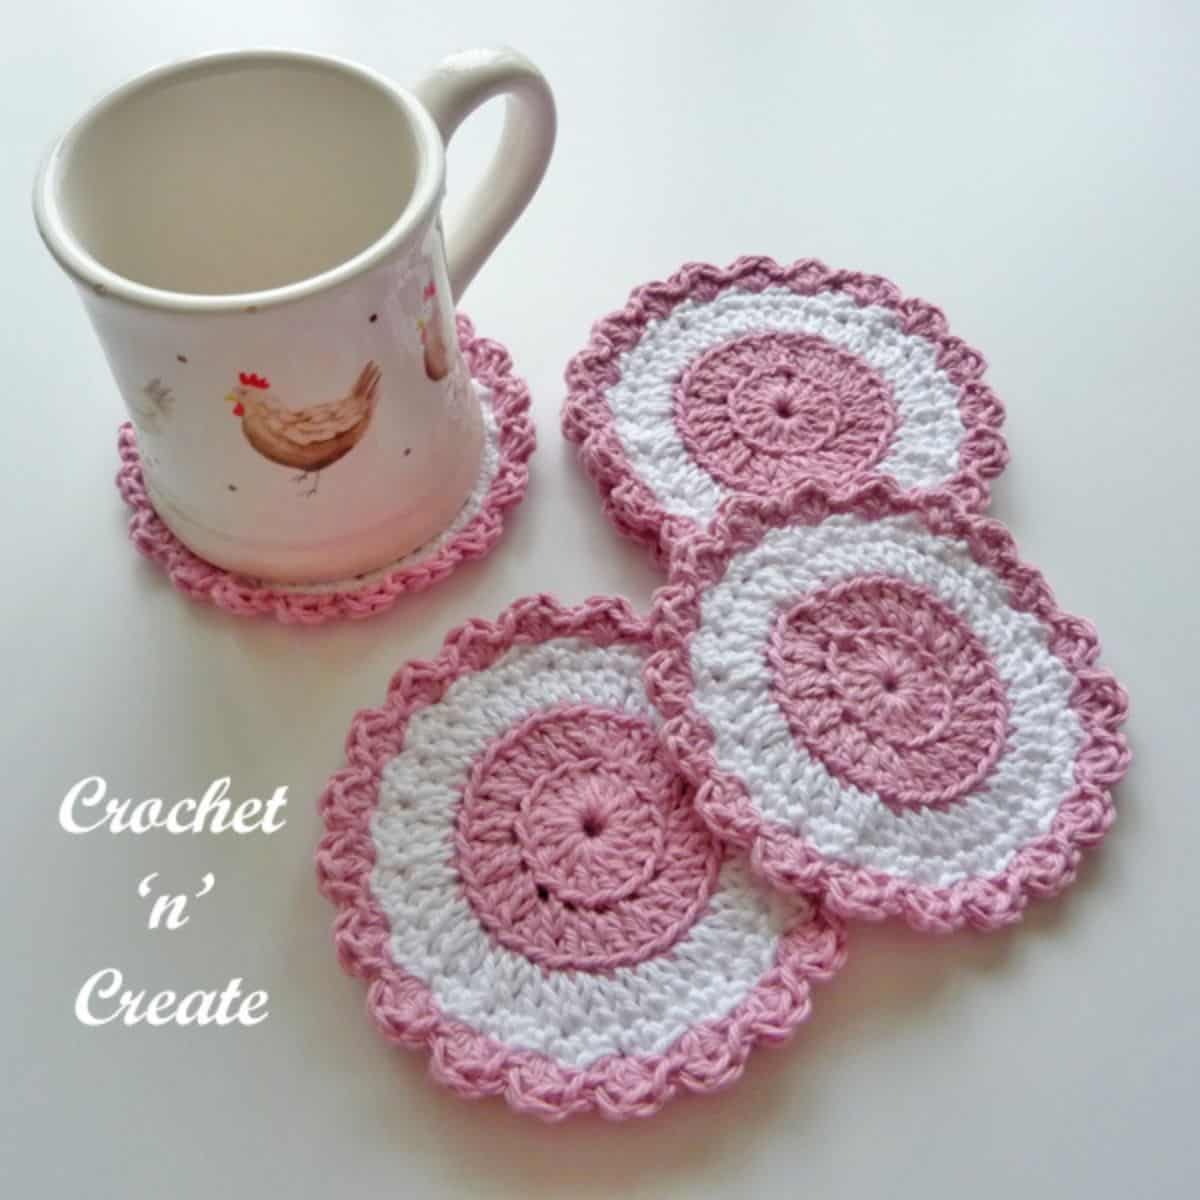 pink and white crochet coasters with a mug sitting on one